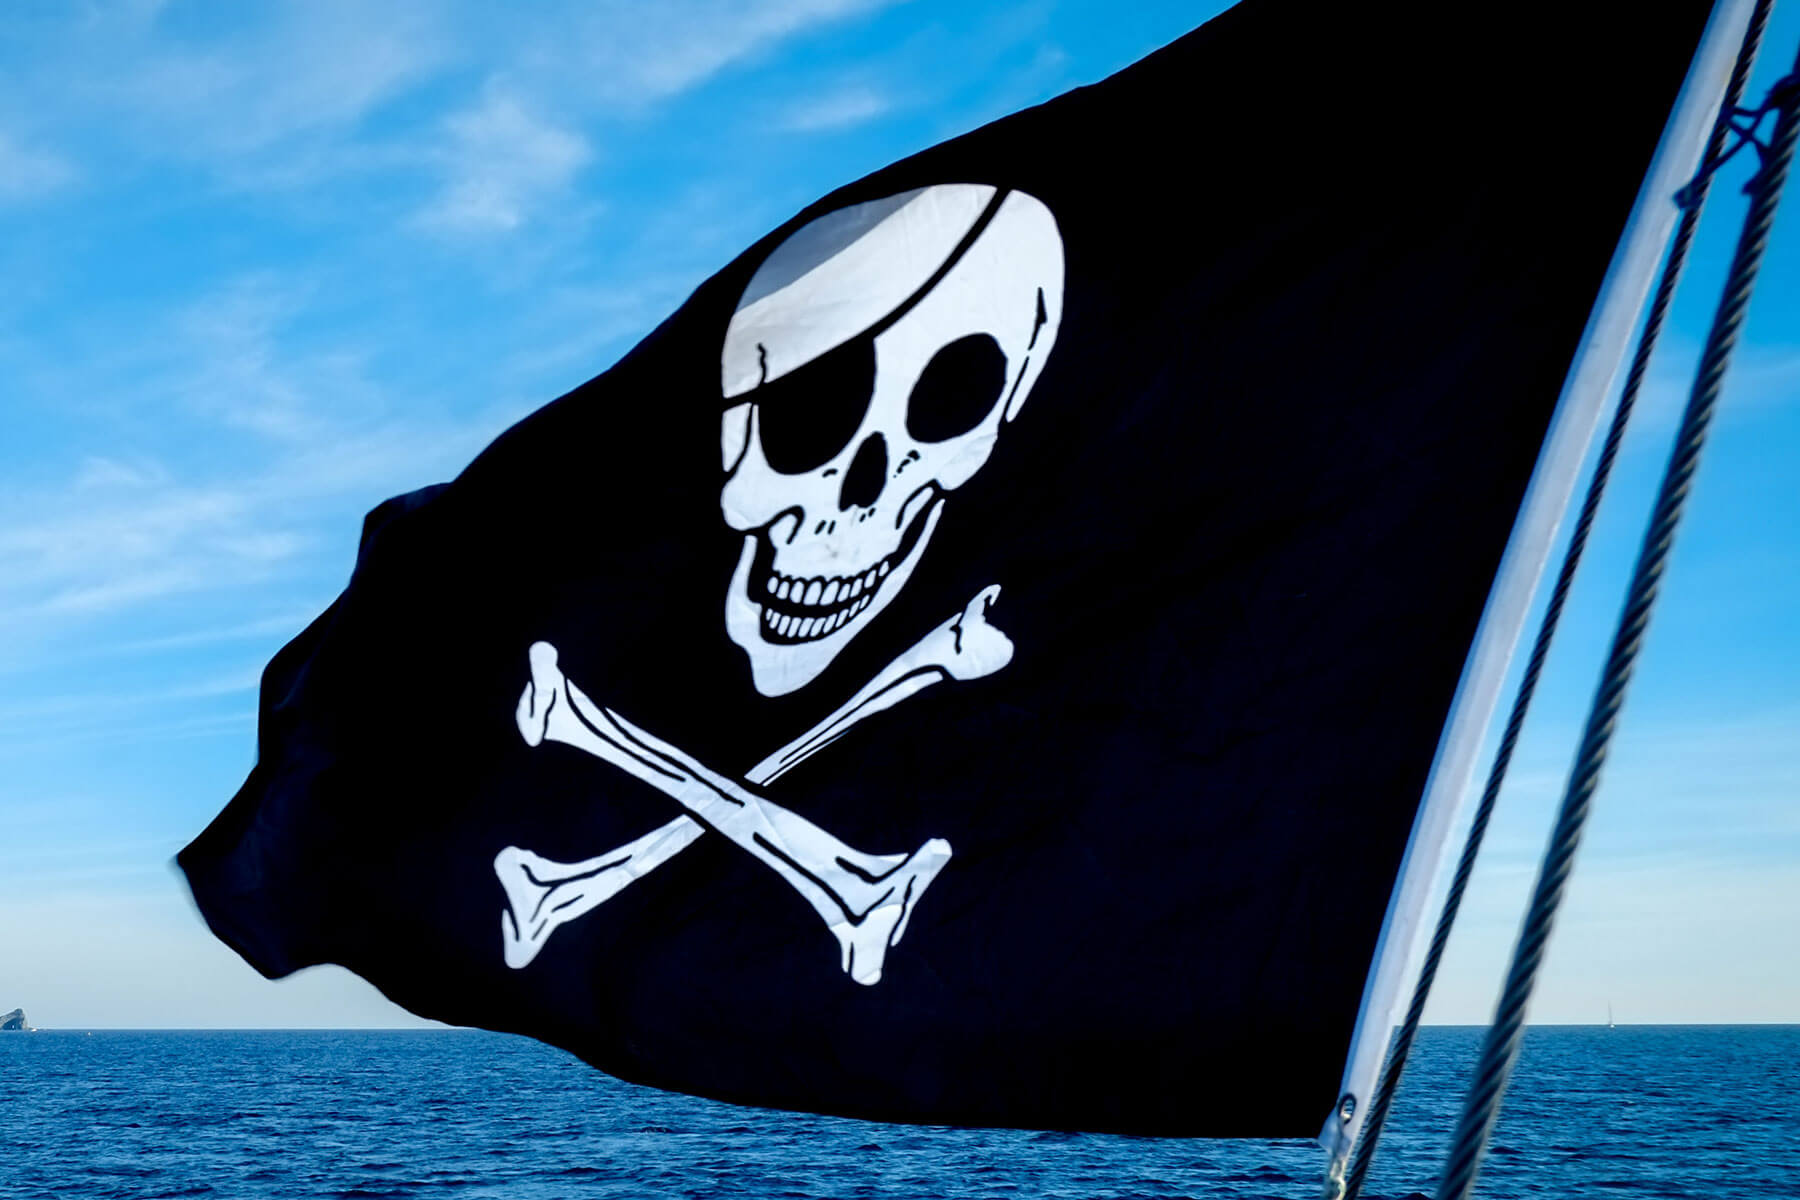 adobe photoshop cs6 extended torrent pirate bay